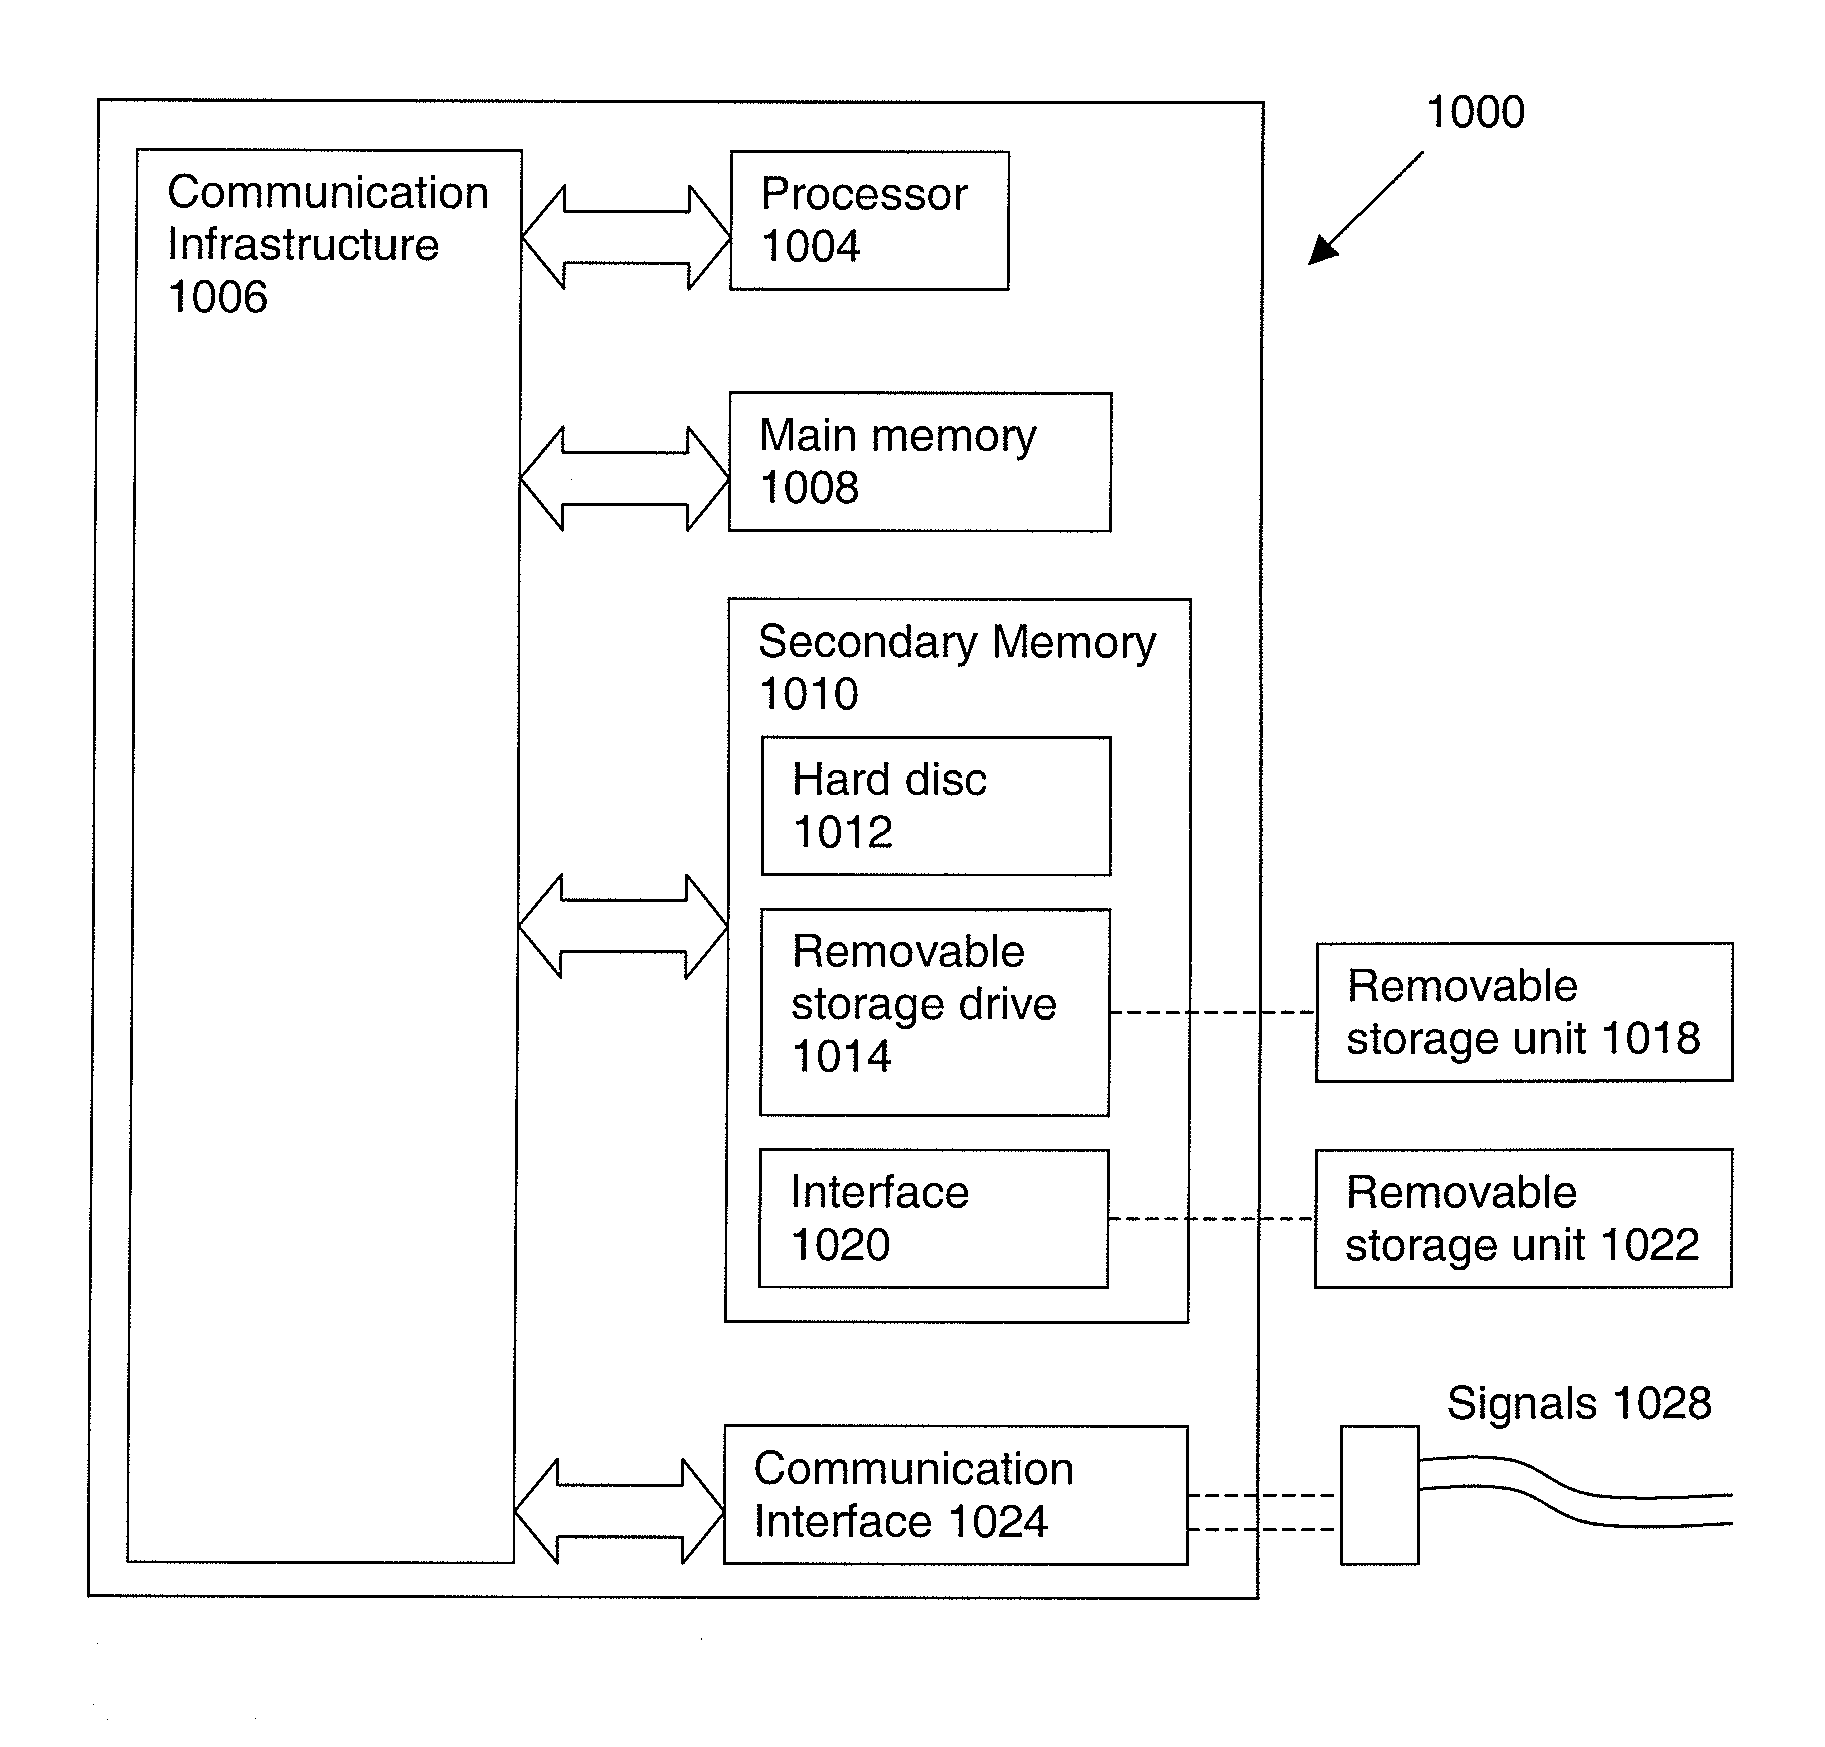 System and Method for Enrollment of Payment Transaction Services